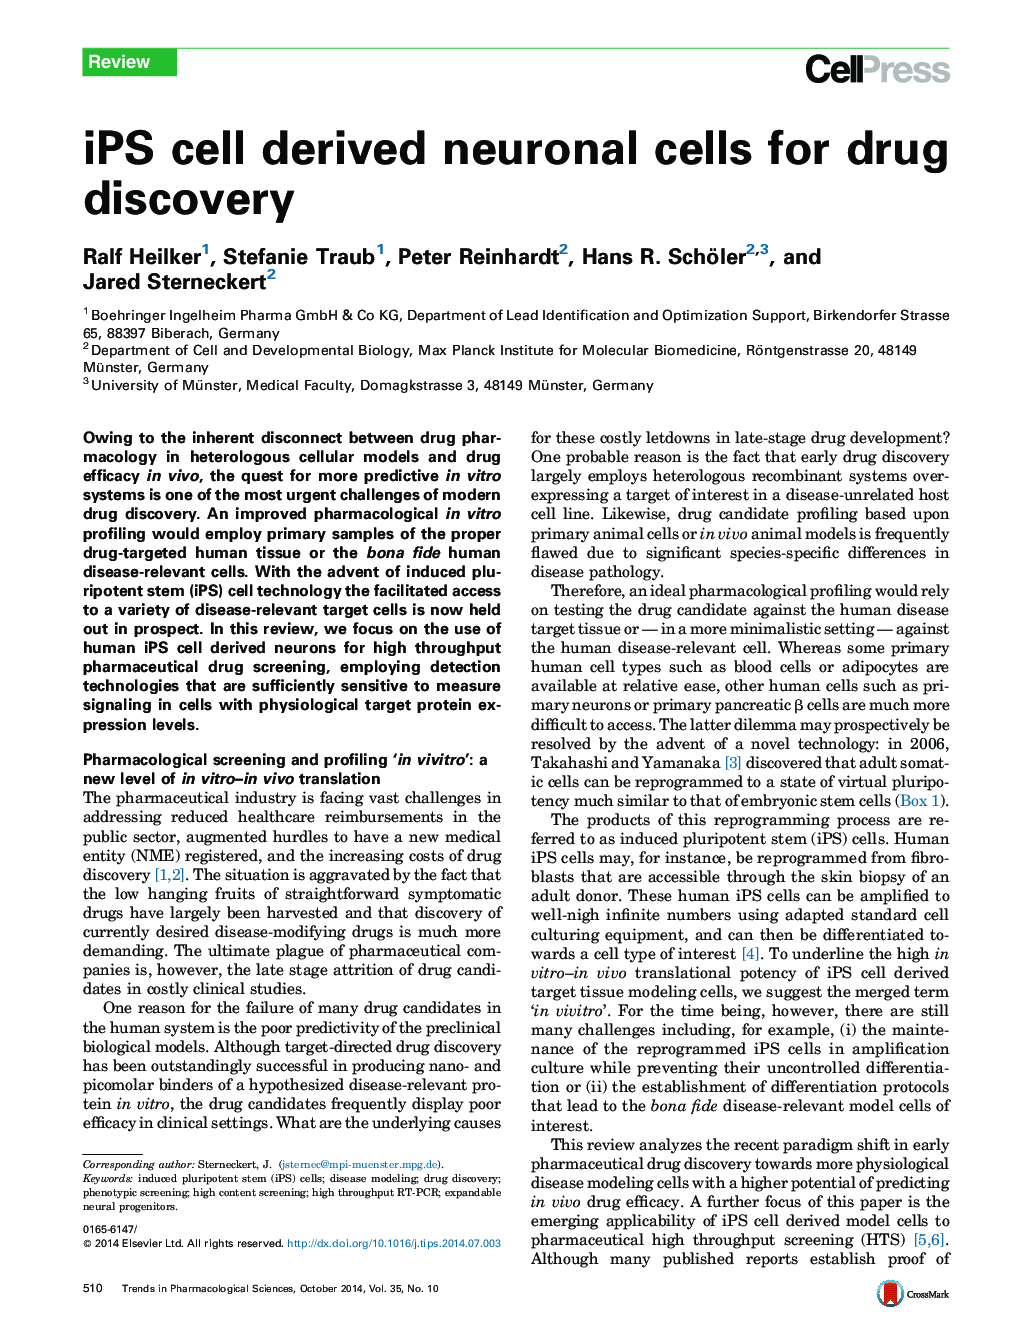 iPS cell derived neuronal cells for drug discovery